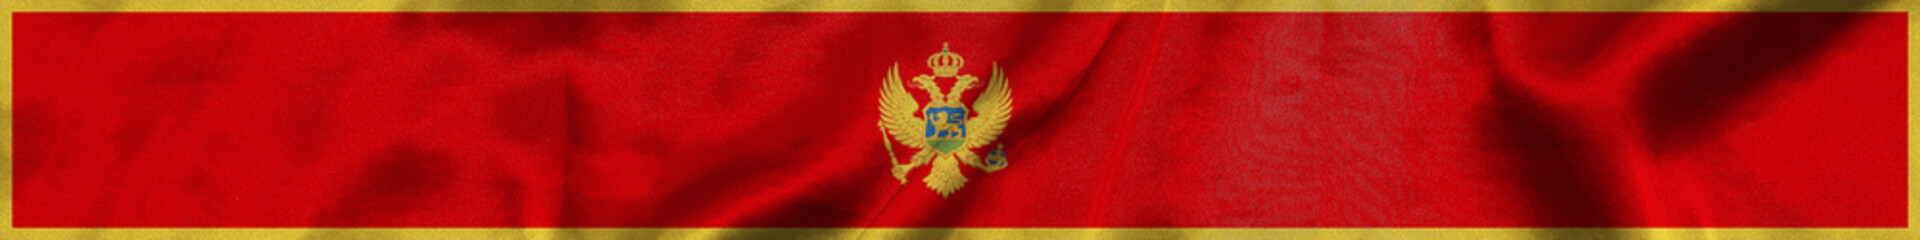 Elongated national flag of Montenegro with a fabric texture fluttering in the wind. Montenegrian flag for website design. 3d illustration